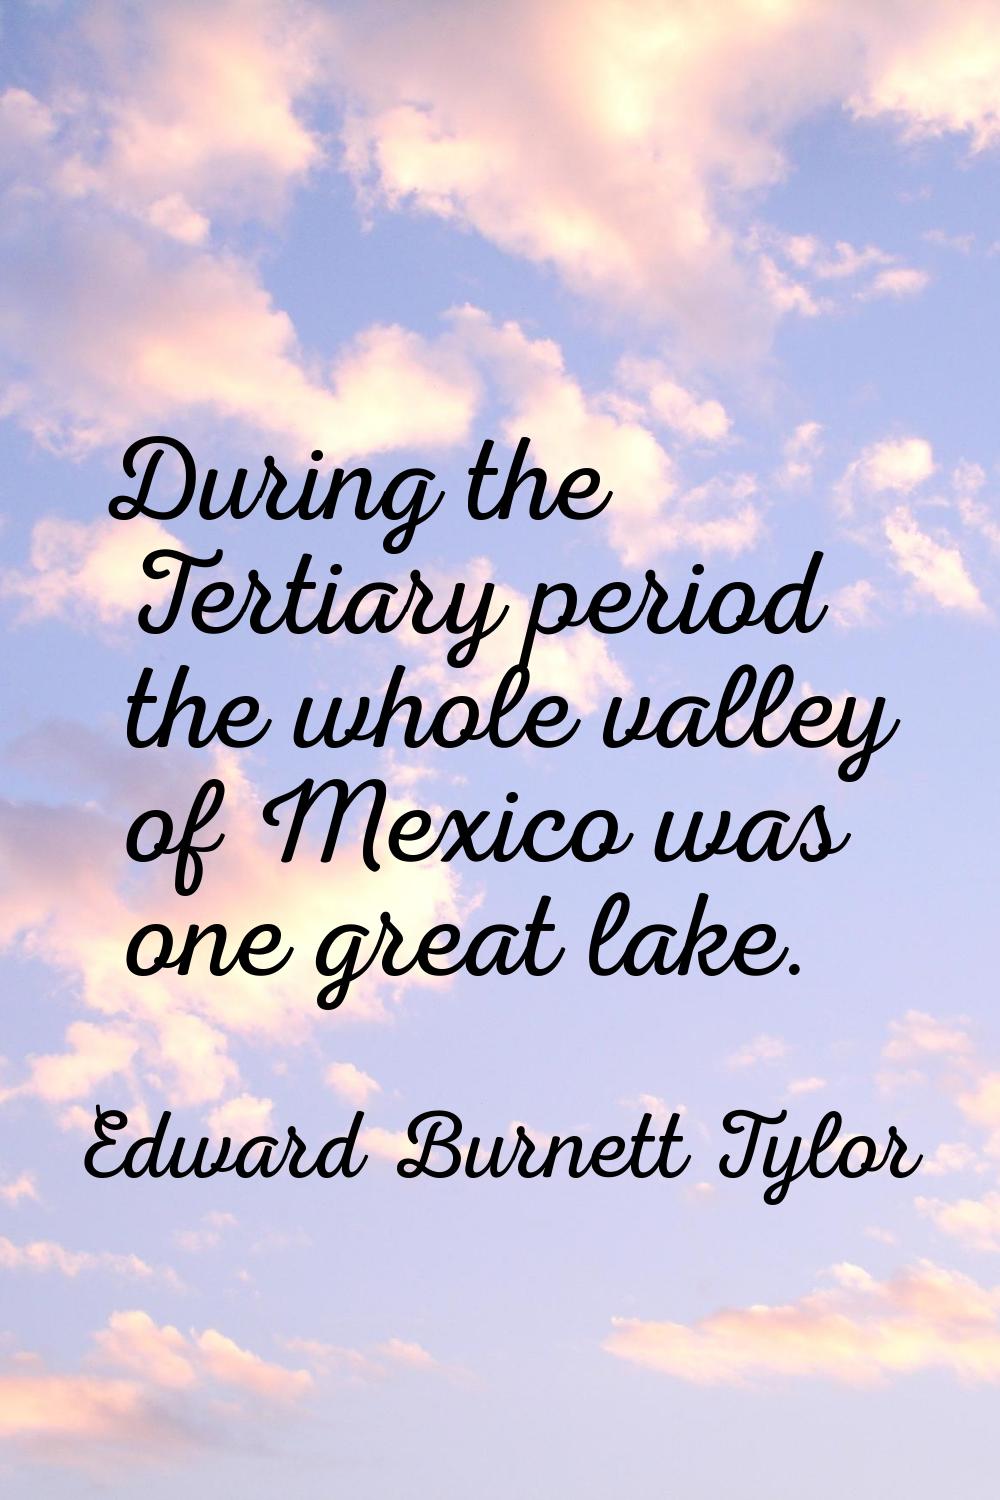 During the Tertiary period the whole valley of Mexico was one great lake.